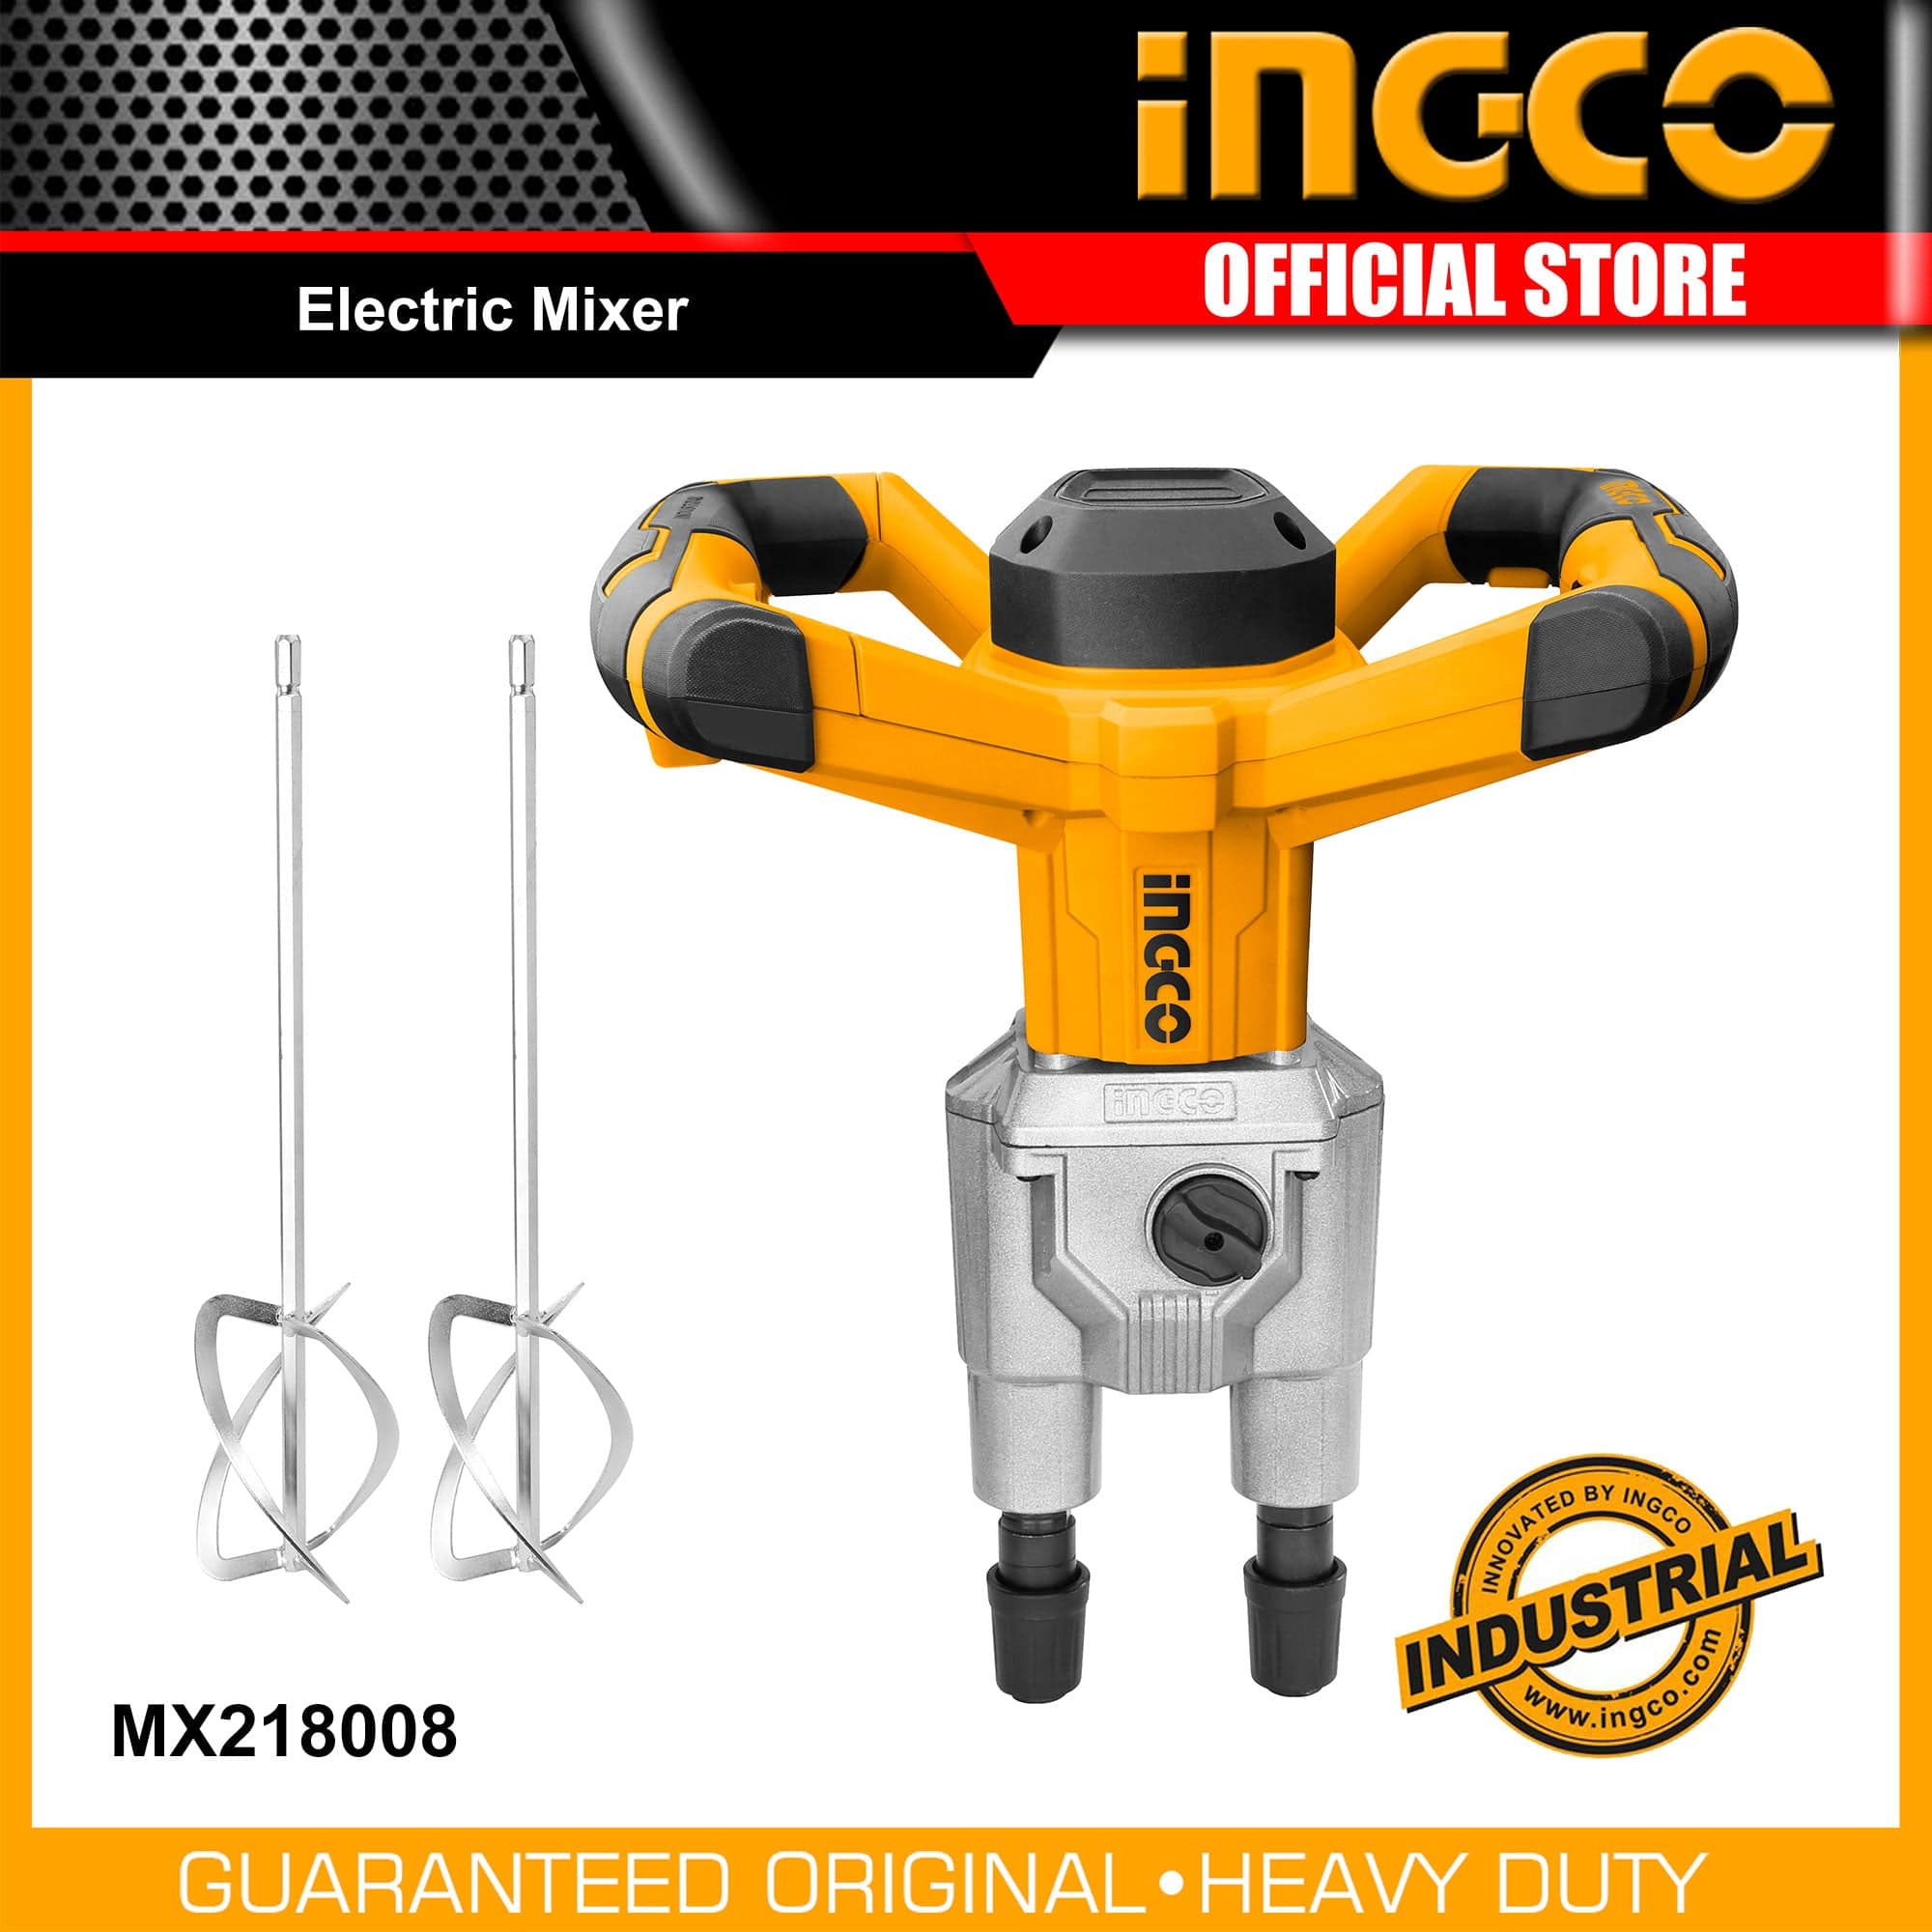 Ingco Electric Mixer 1800W - MX218008 - Buy Online in Accra, Ghana at Supply Master Mixer Buy Tools hardware Building materials